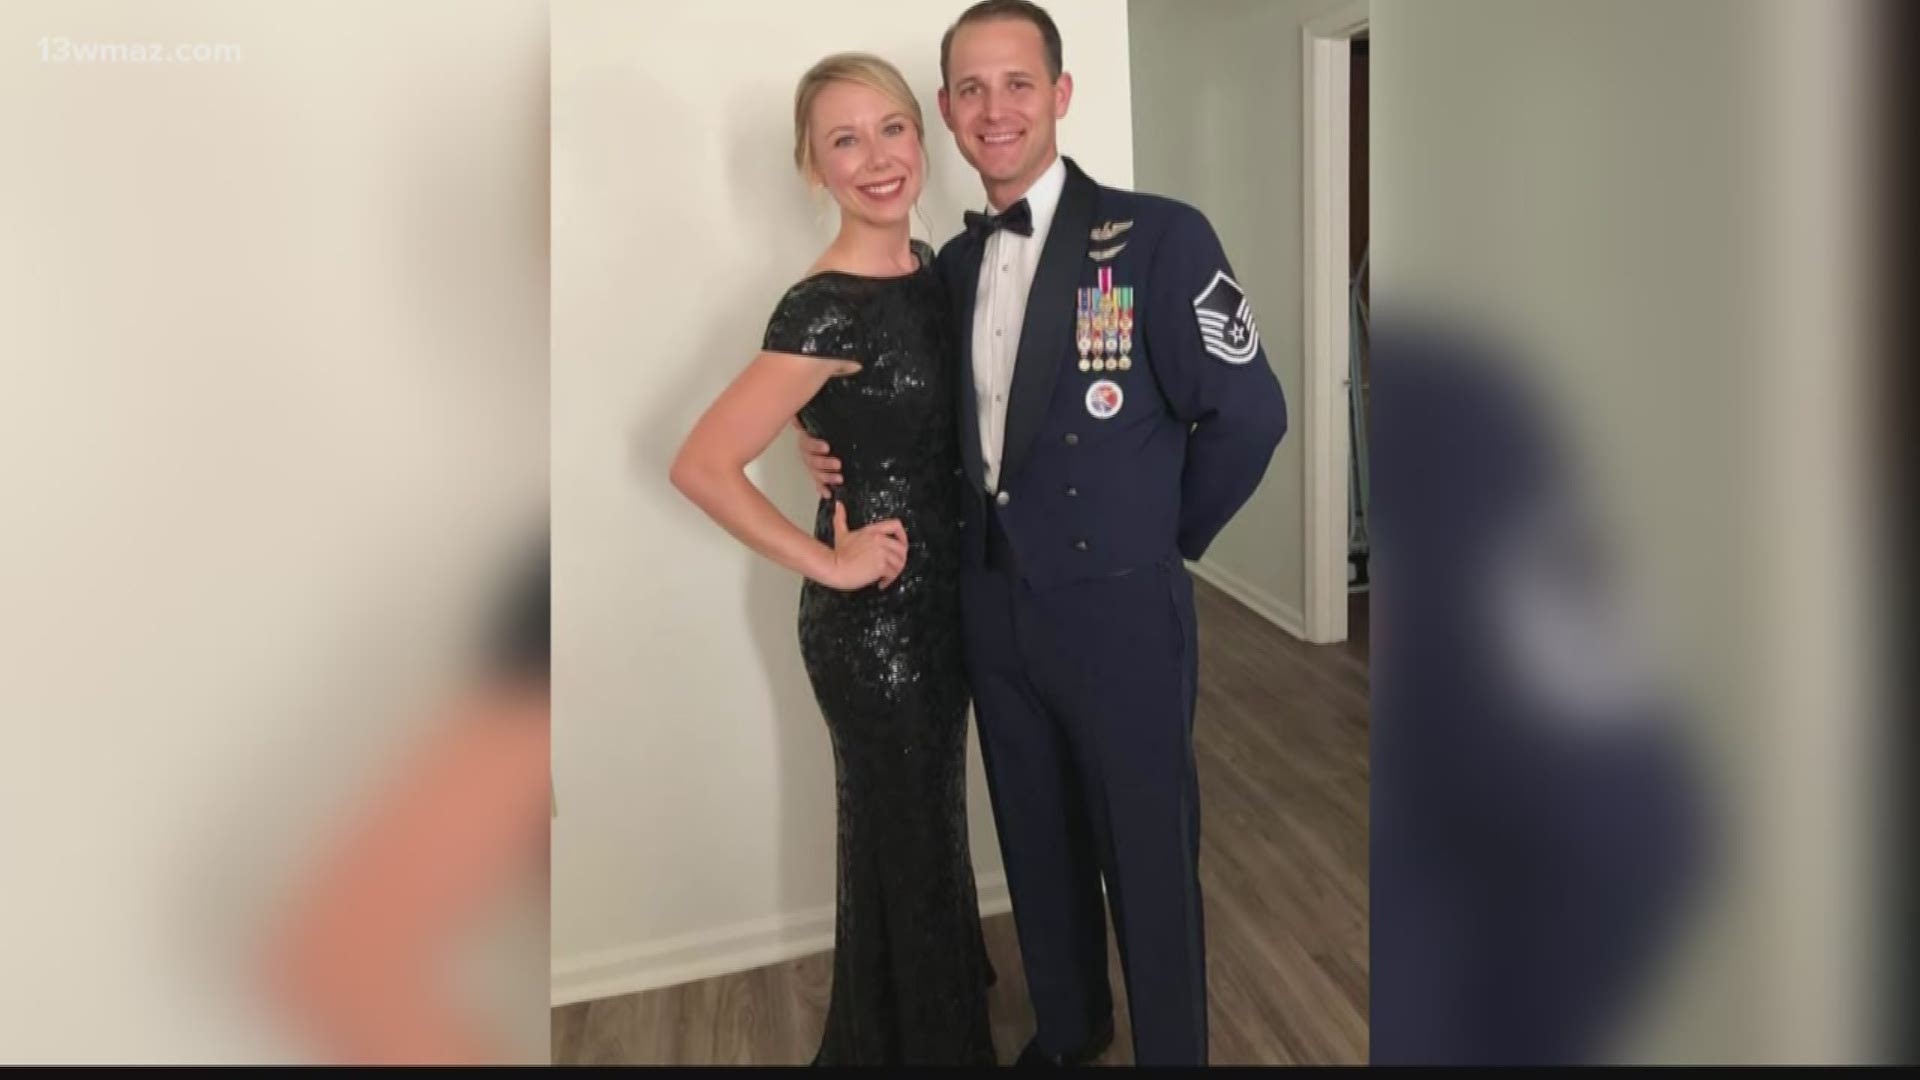 Ashley Eller is a nominee for the Armed Forces Insurance Military Spouse of the Year. Here's how she is giving back to her military community.